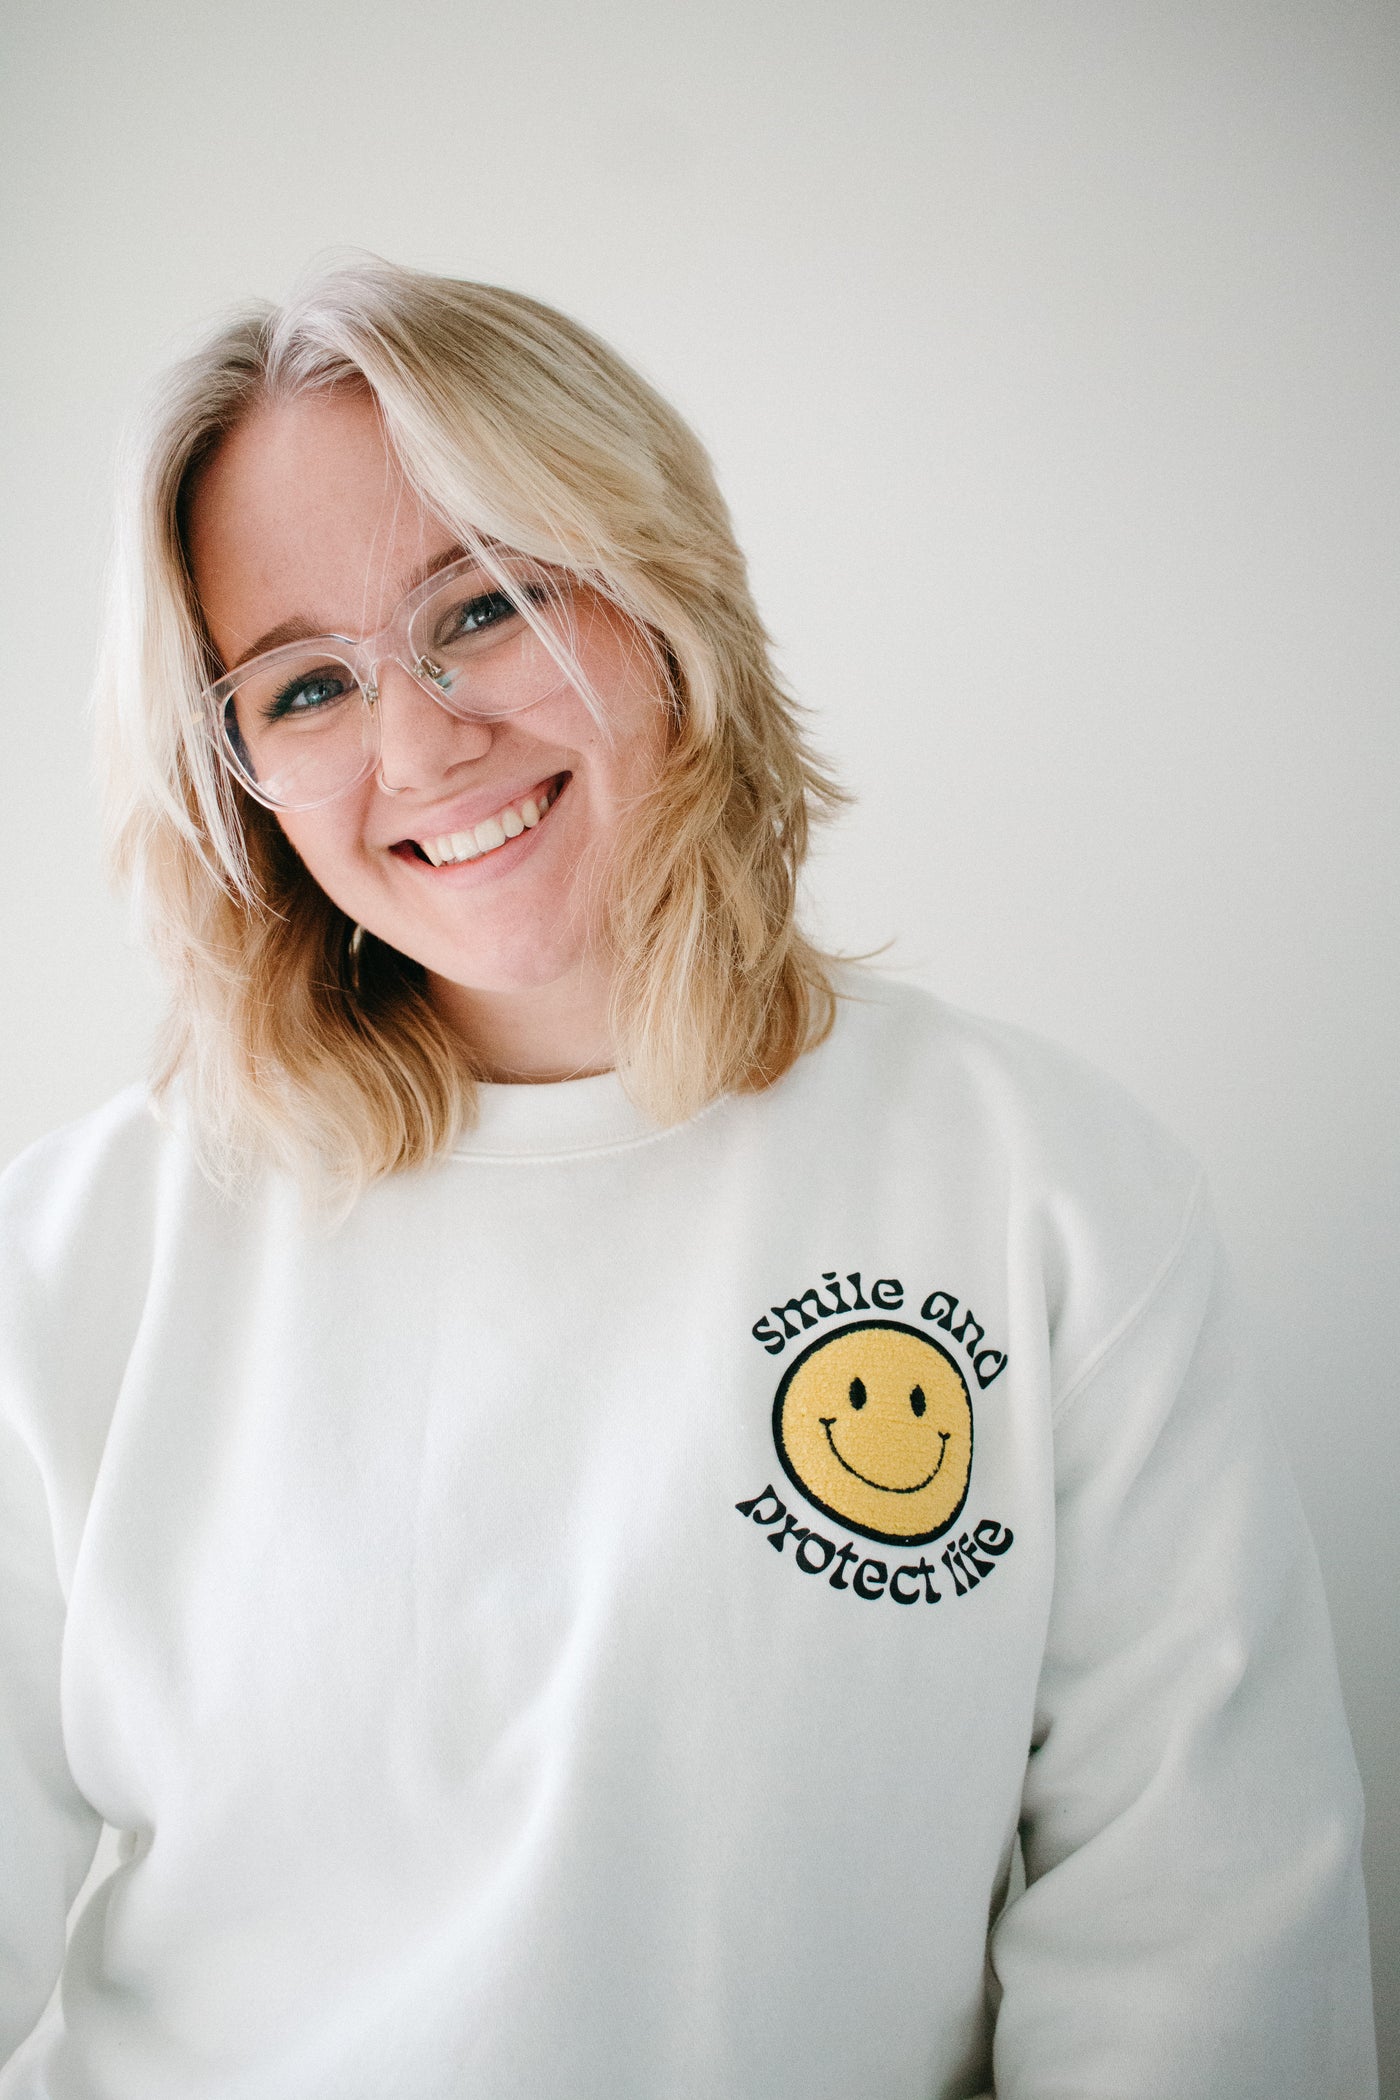 A blonde woman in a bone white, crewneck sweatshirt with a smiley patch in the upper right hand corner of the shirt, surrounded by the words "smile and protect life."